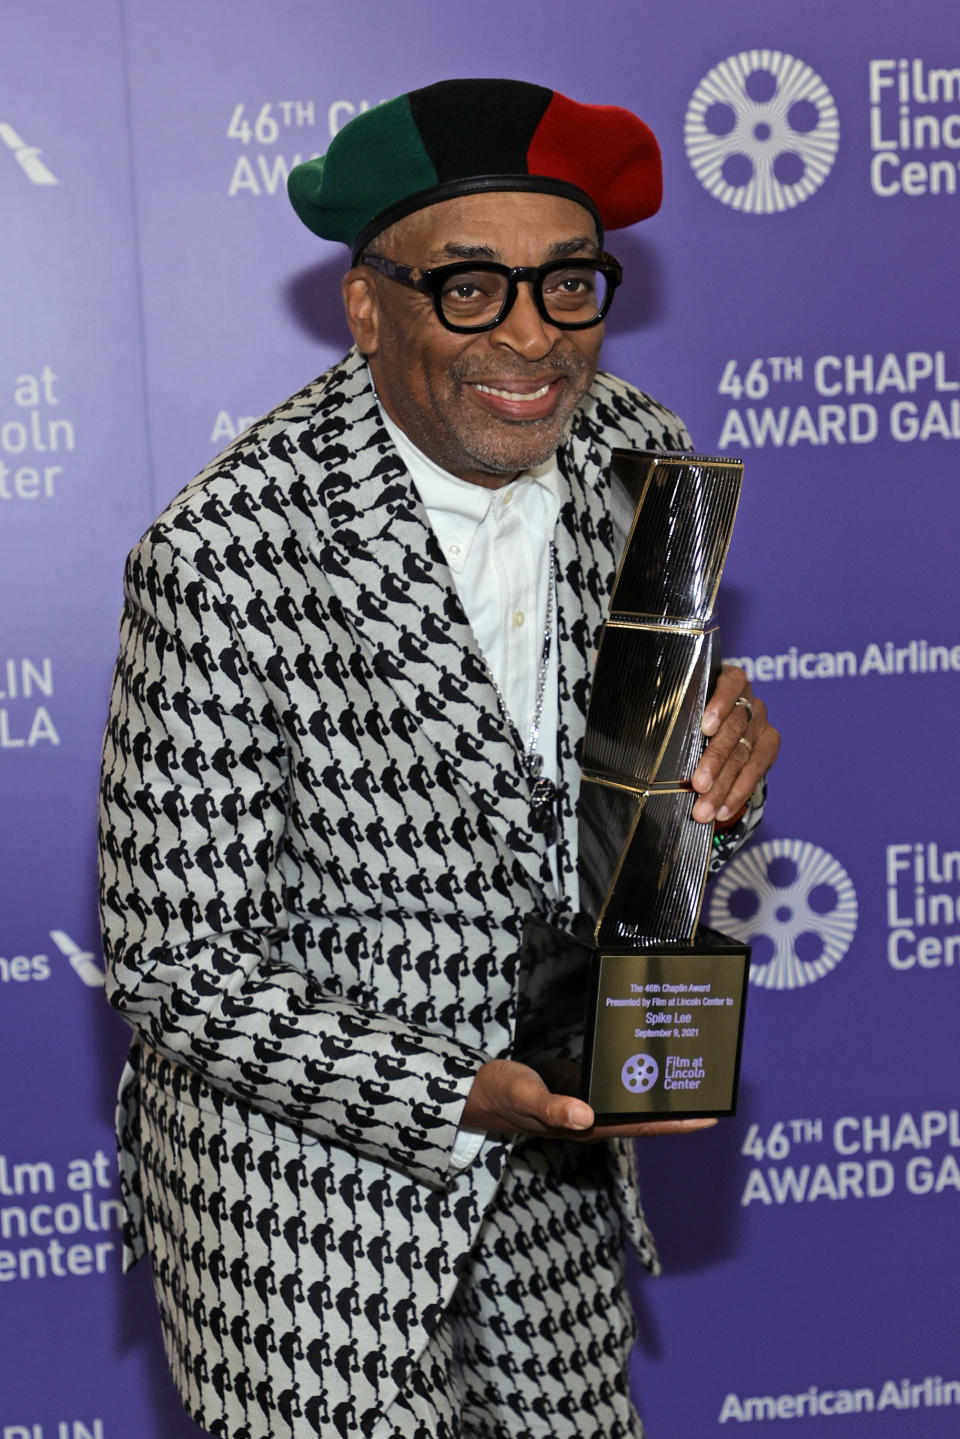 Spike Lee poses backstage during the 46th Chaplin Award Gala Honoring Spike Lee on September 09, 2021 in New York City. - Credit: Jamie McCarthy/Getty Images